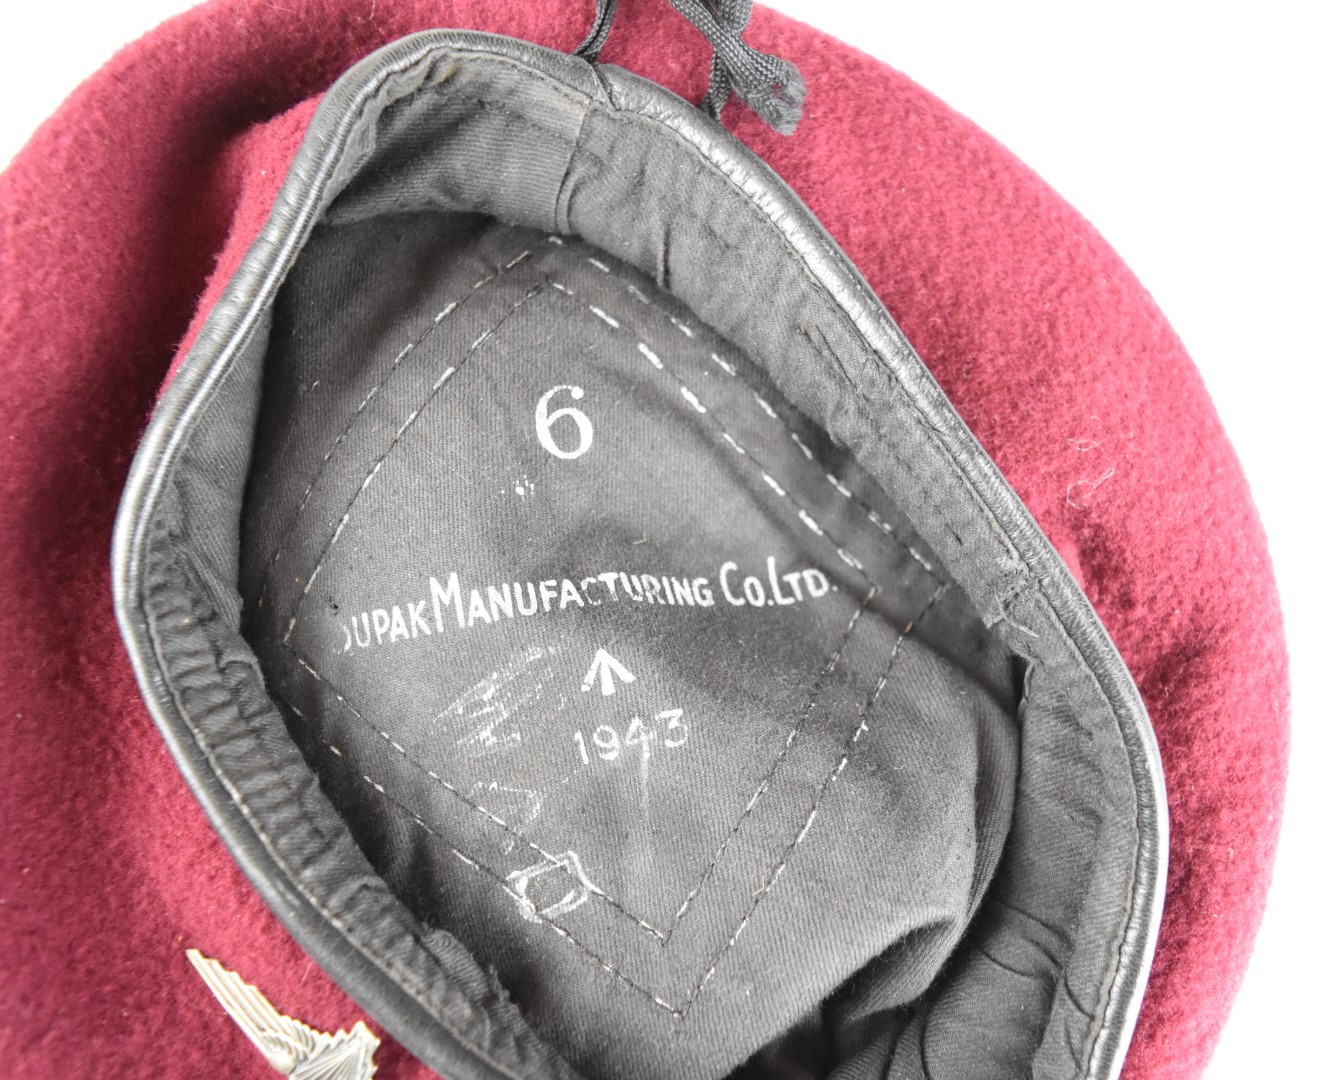 British Army WW2 Parachute Regiment beret by Supak Manufactoring Co Ltd, with broad arrow mark and - Image 4 of 4